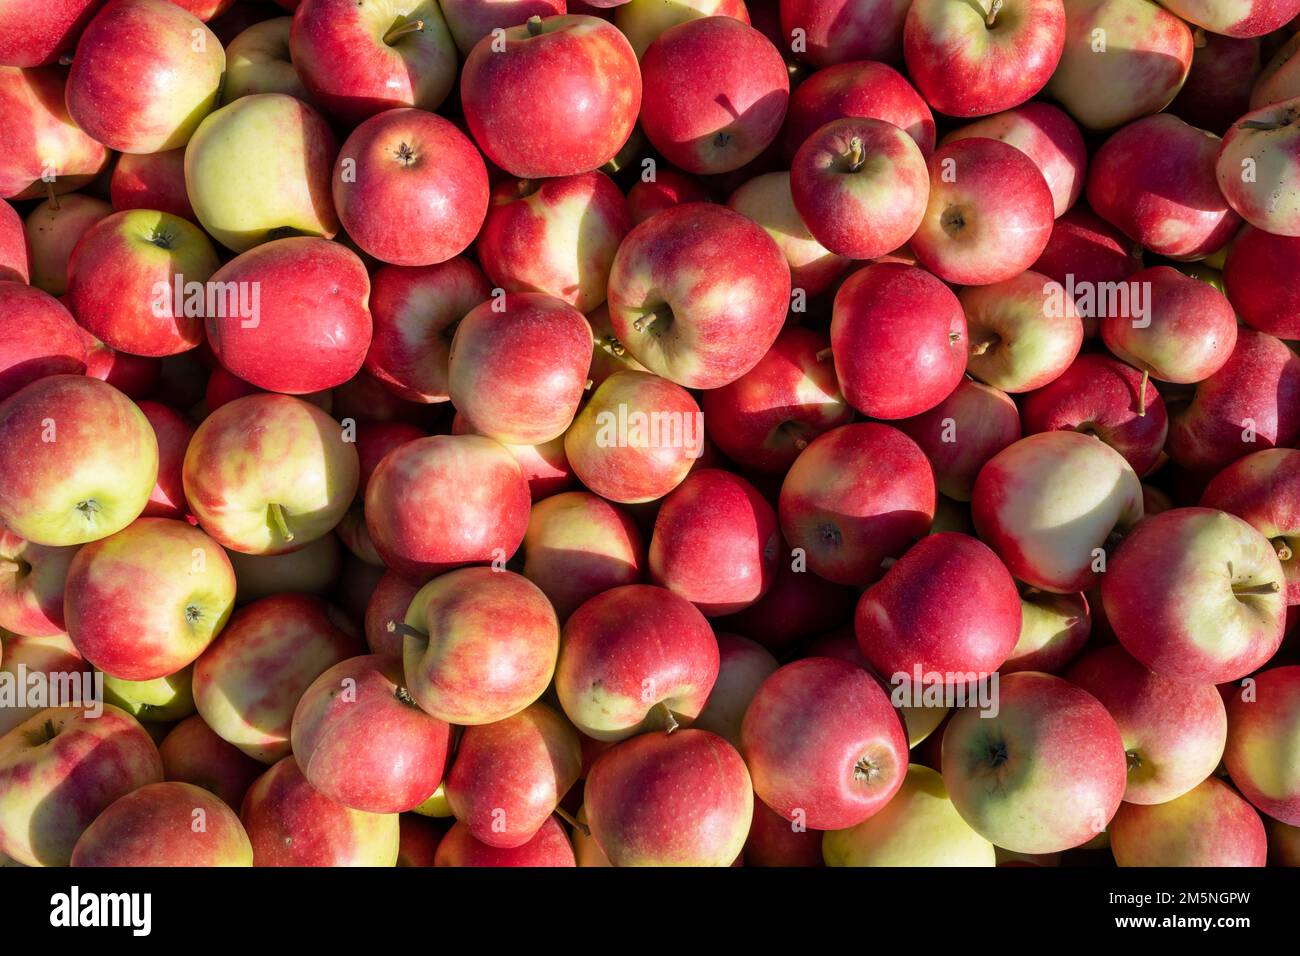 Apples of the Jonagold variety, full-size, Bodman-Ludwigshafen, Constance district, Baden-Wuerttemberg, Germany Stock Photo